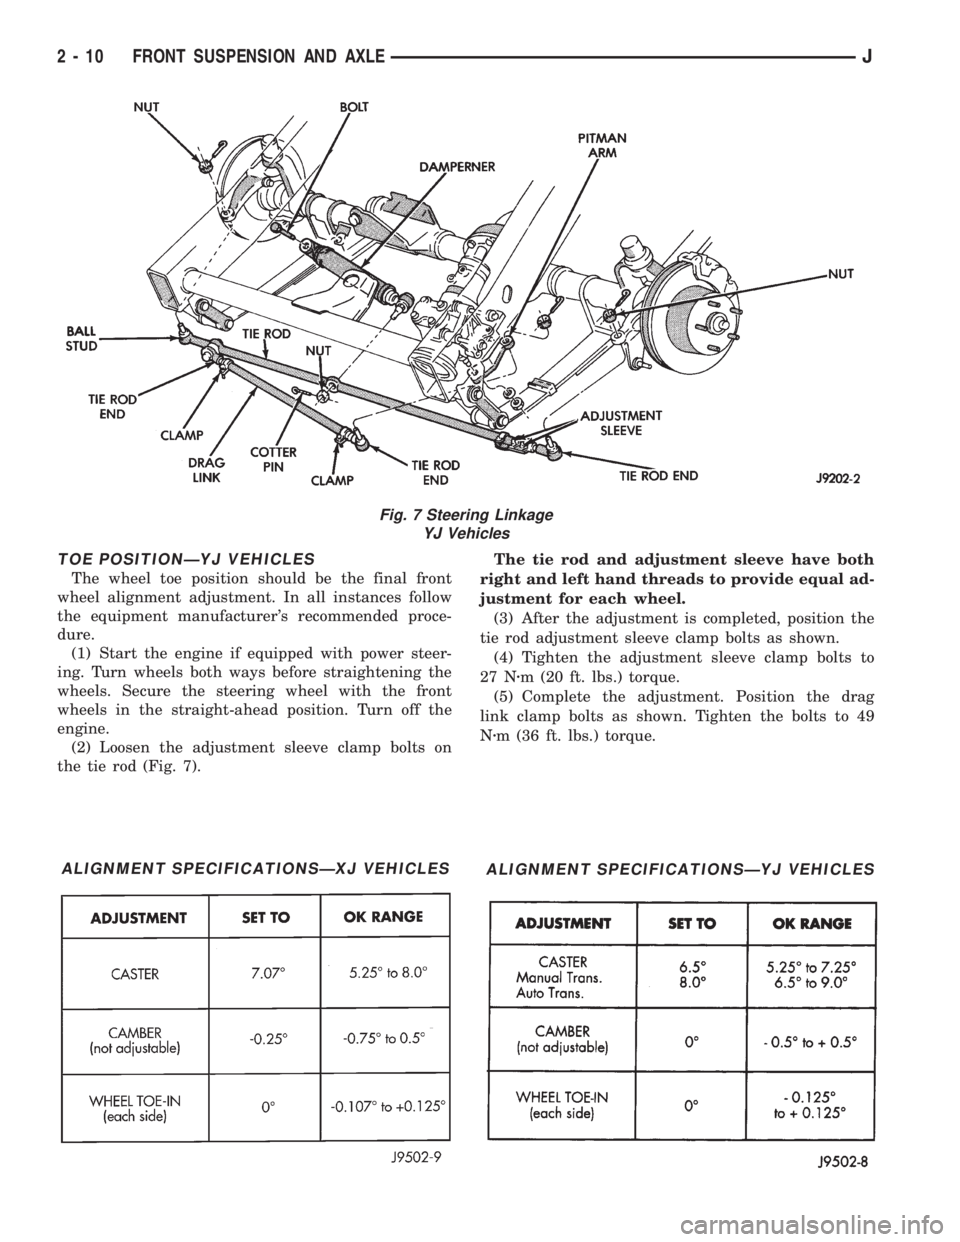 JEEP YJ 1995  Service And Repair Manual TOE POSITIONÐYJ VEHICLES
The wheel toe position should be the final front
wheel alignment adjustment. In all instances follow
the equipment manufacturers recommended proce-
dure.
(1) Start the engin